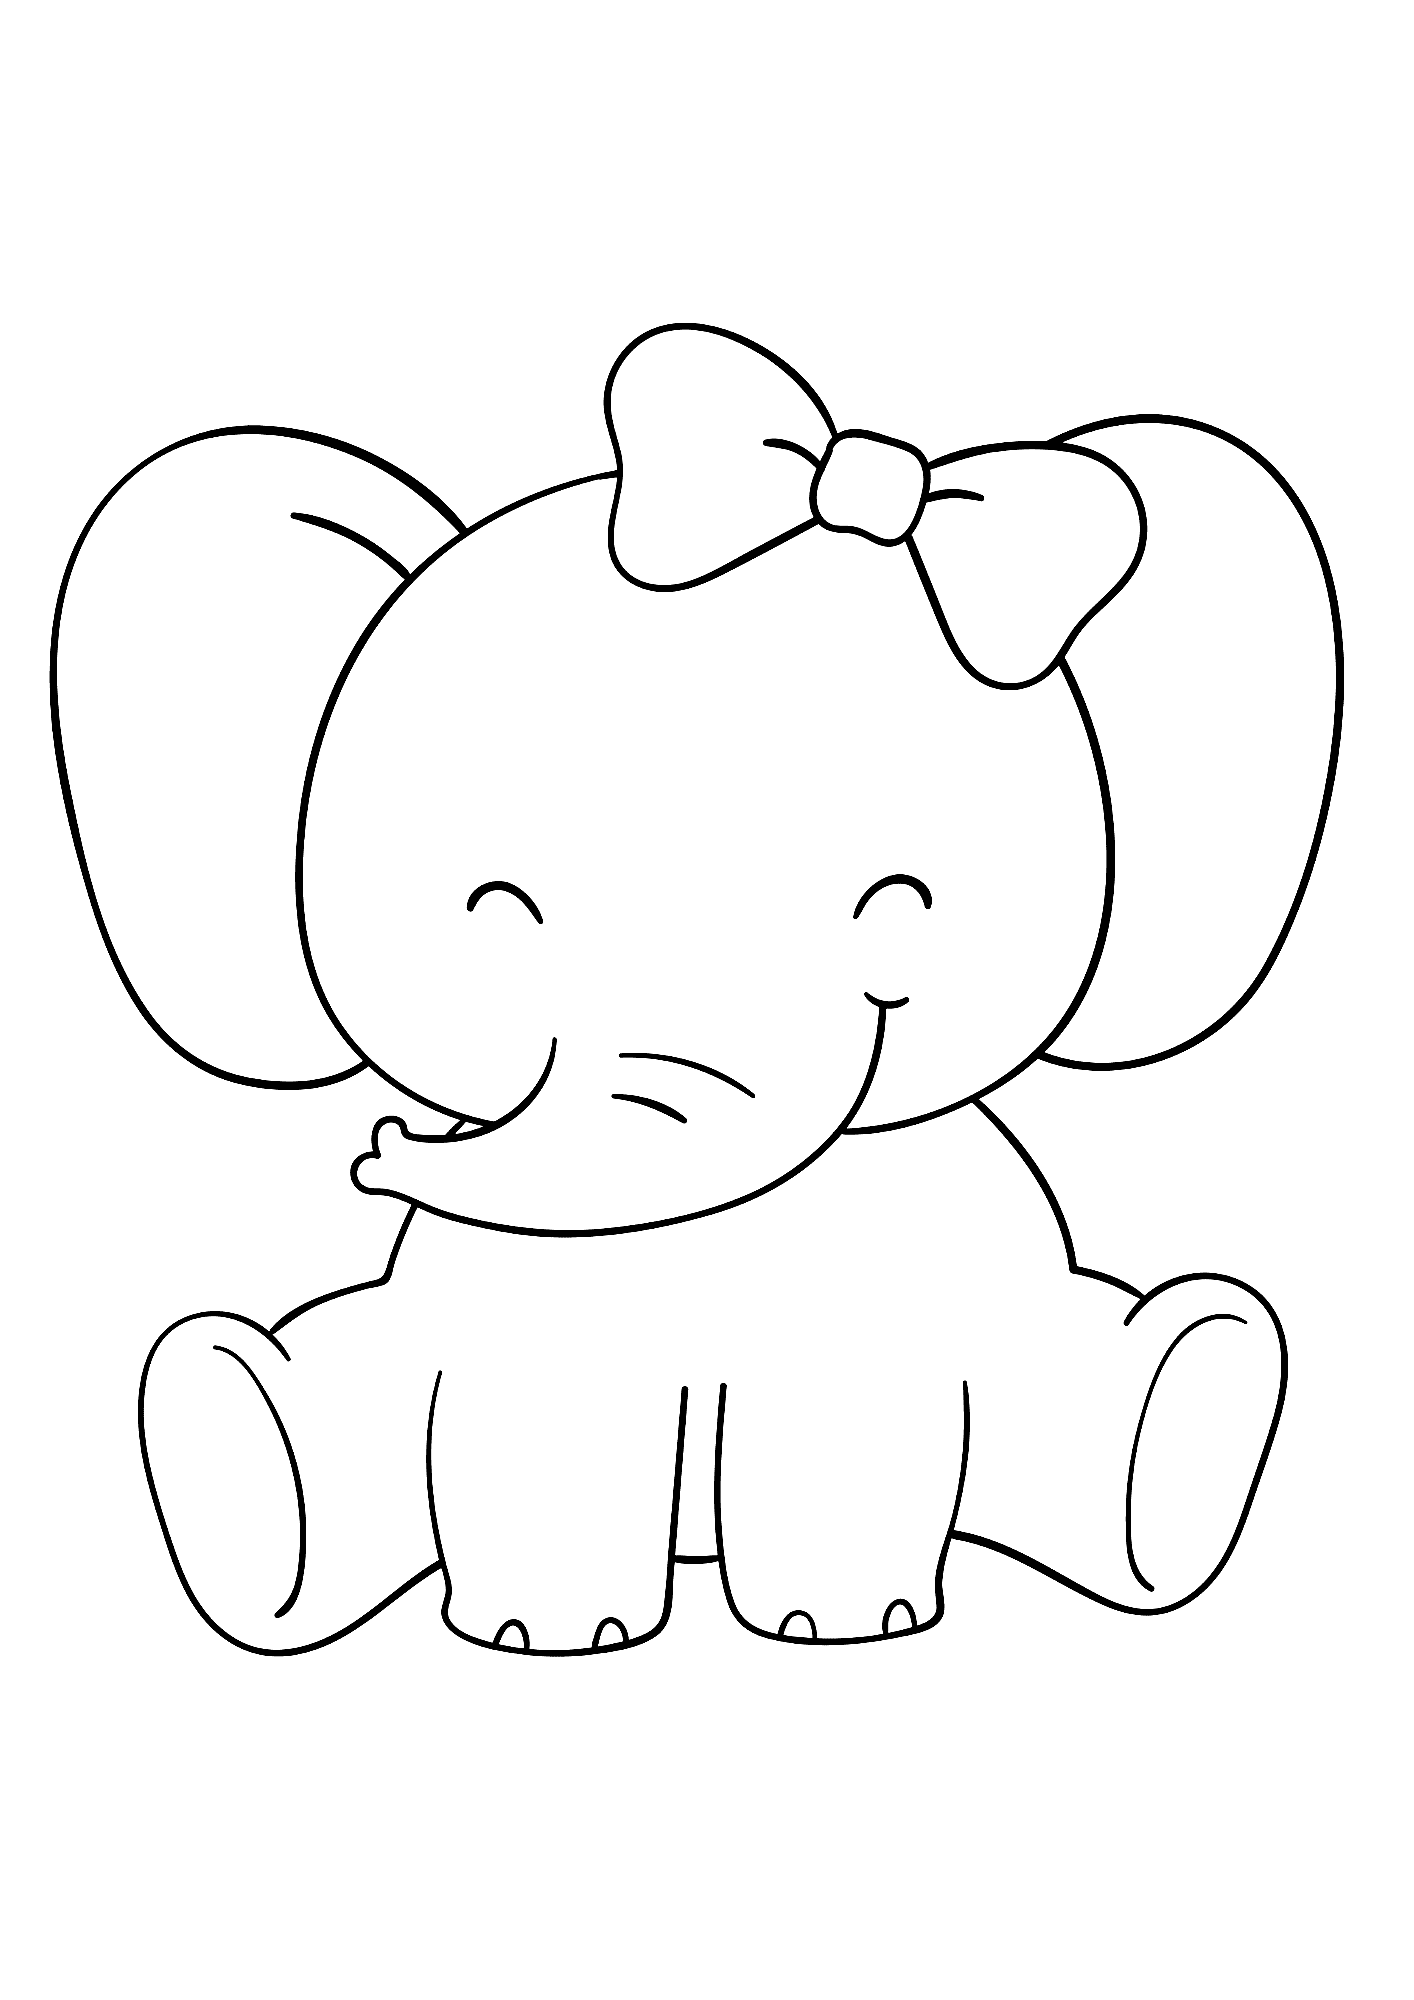 Image Of Elephant Coloring Page